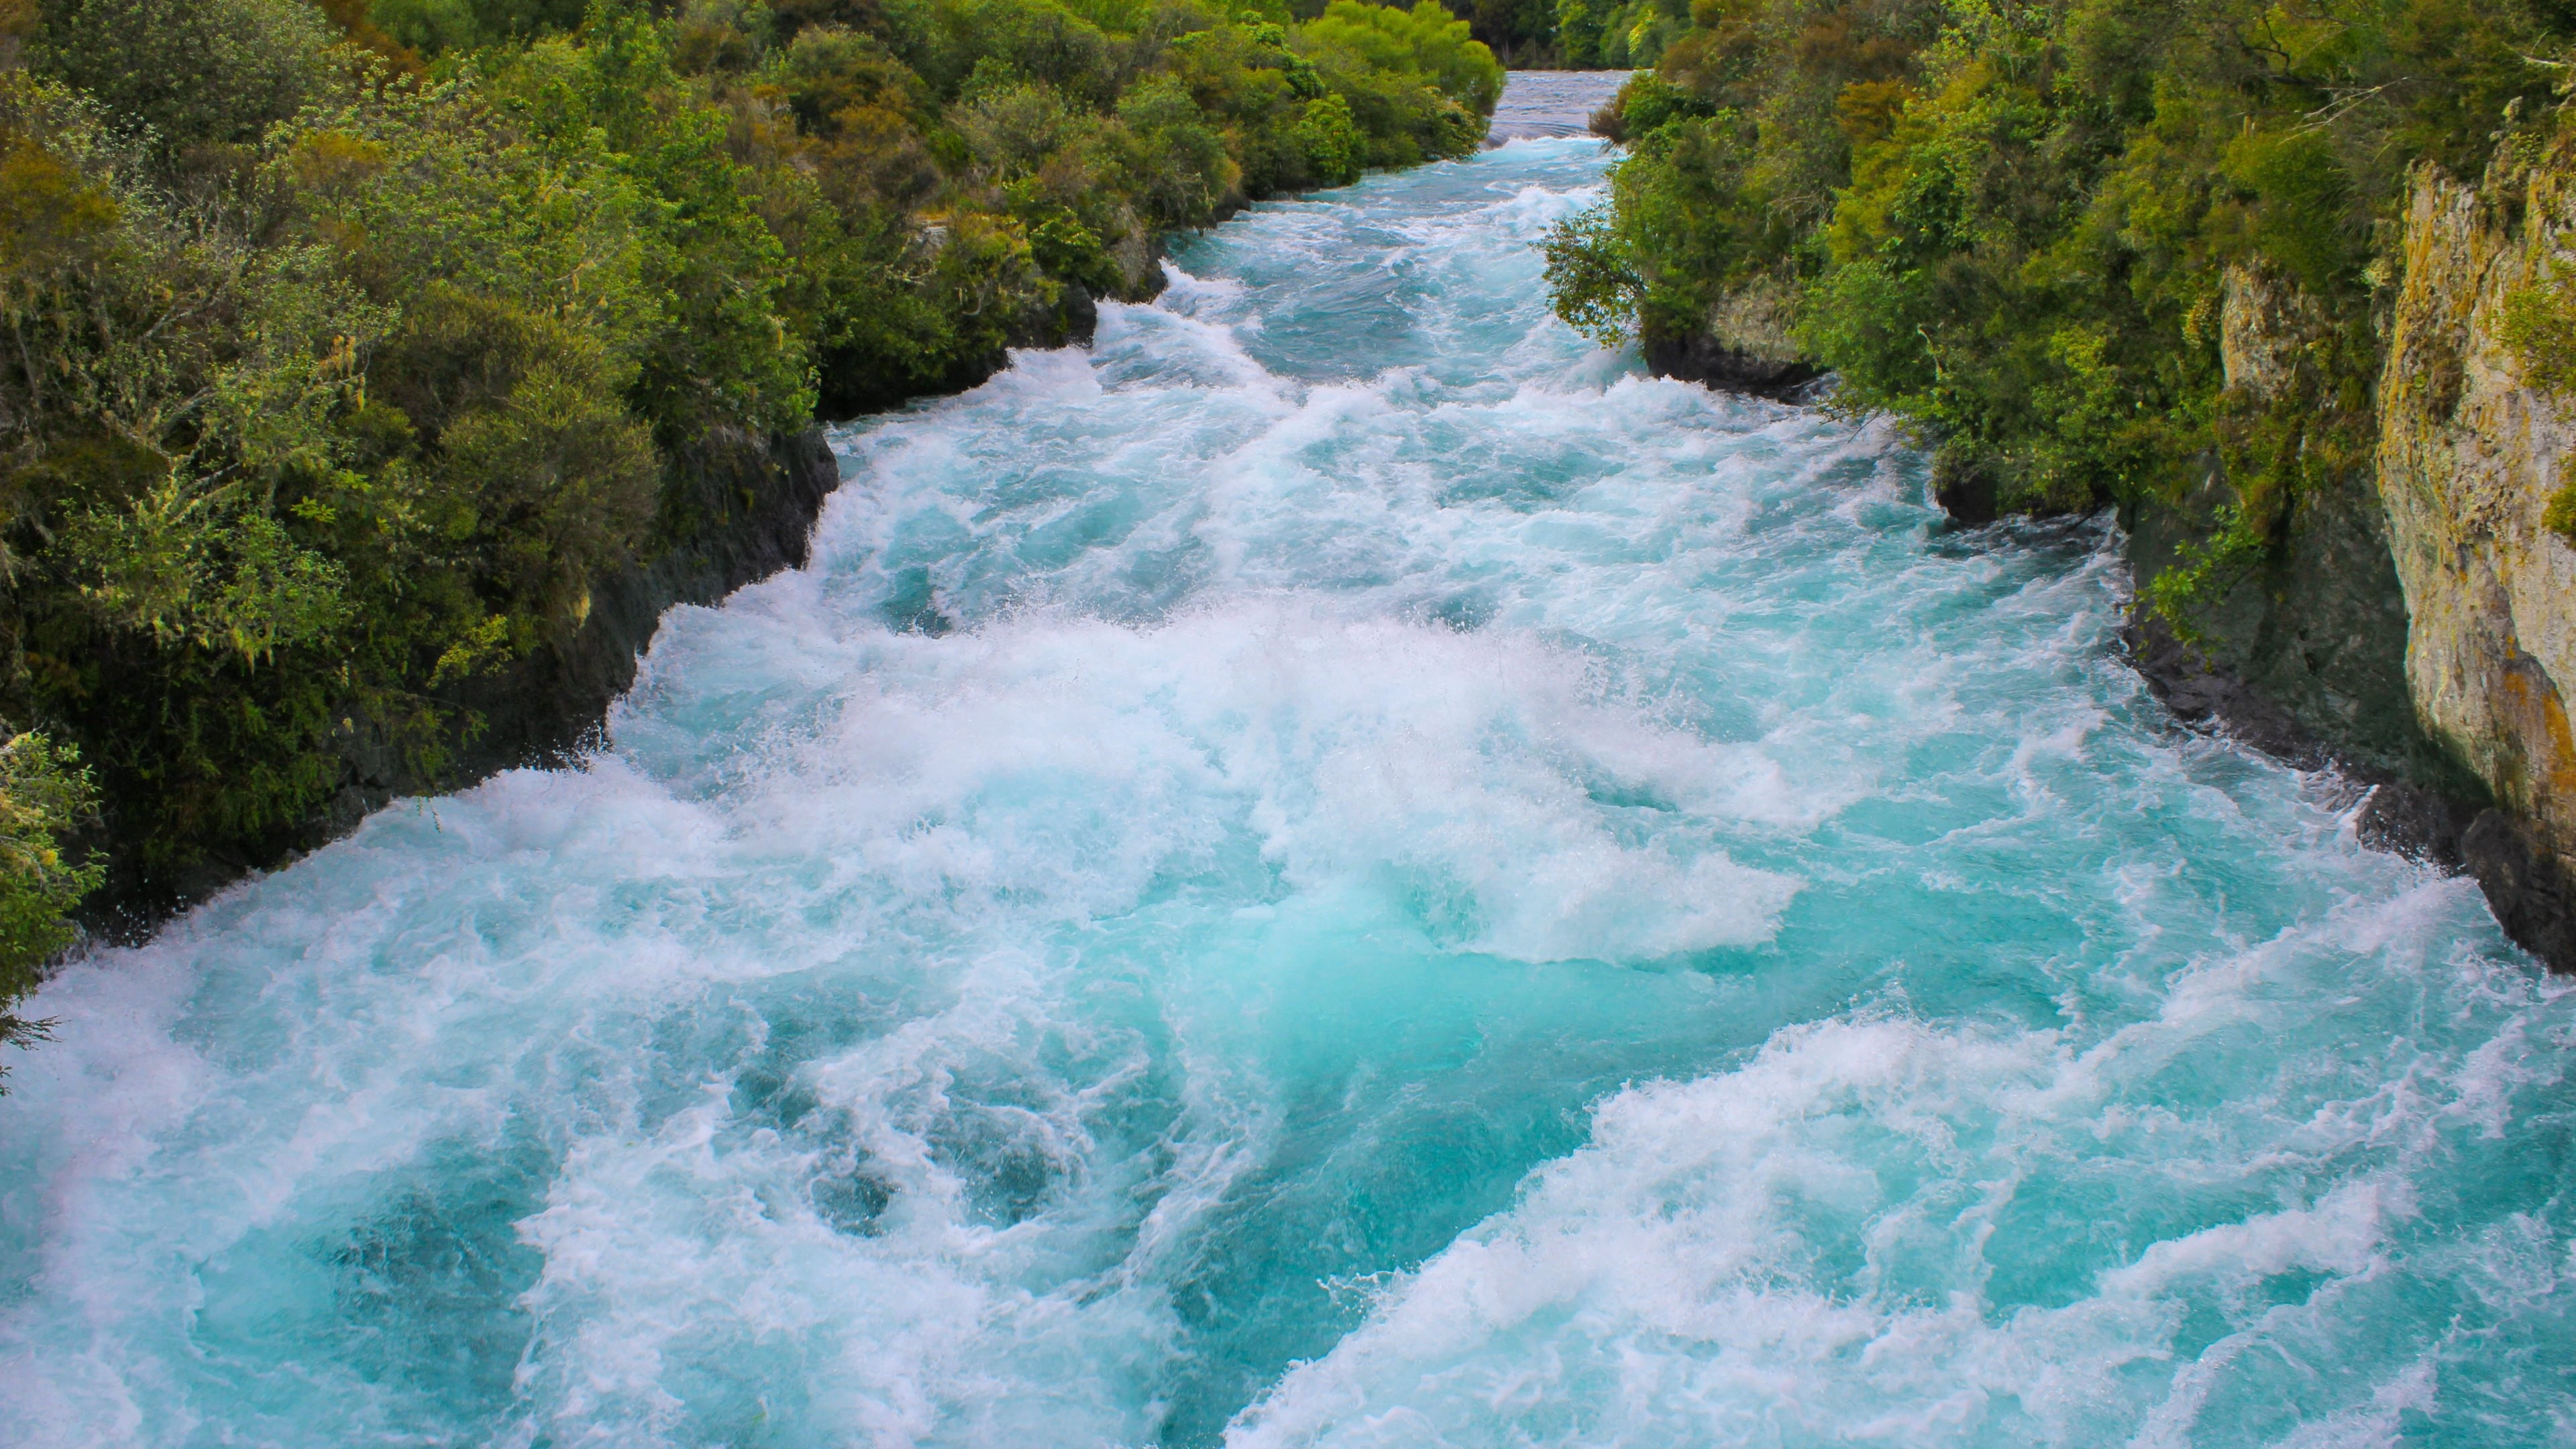 General 3840x2160 nature landscape river New Zealand cyan turquoise